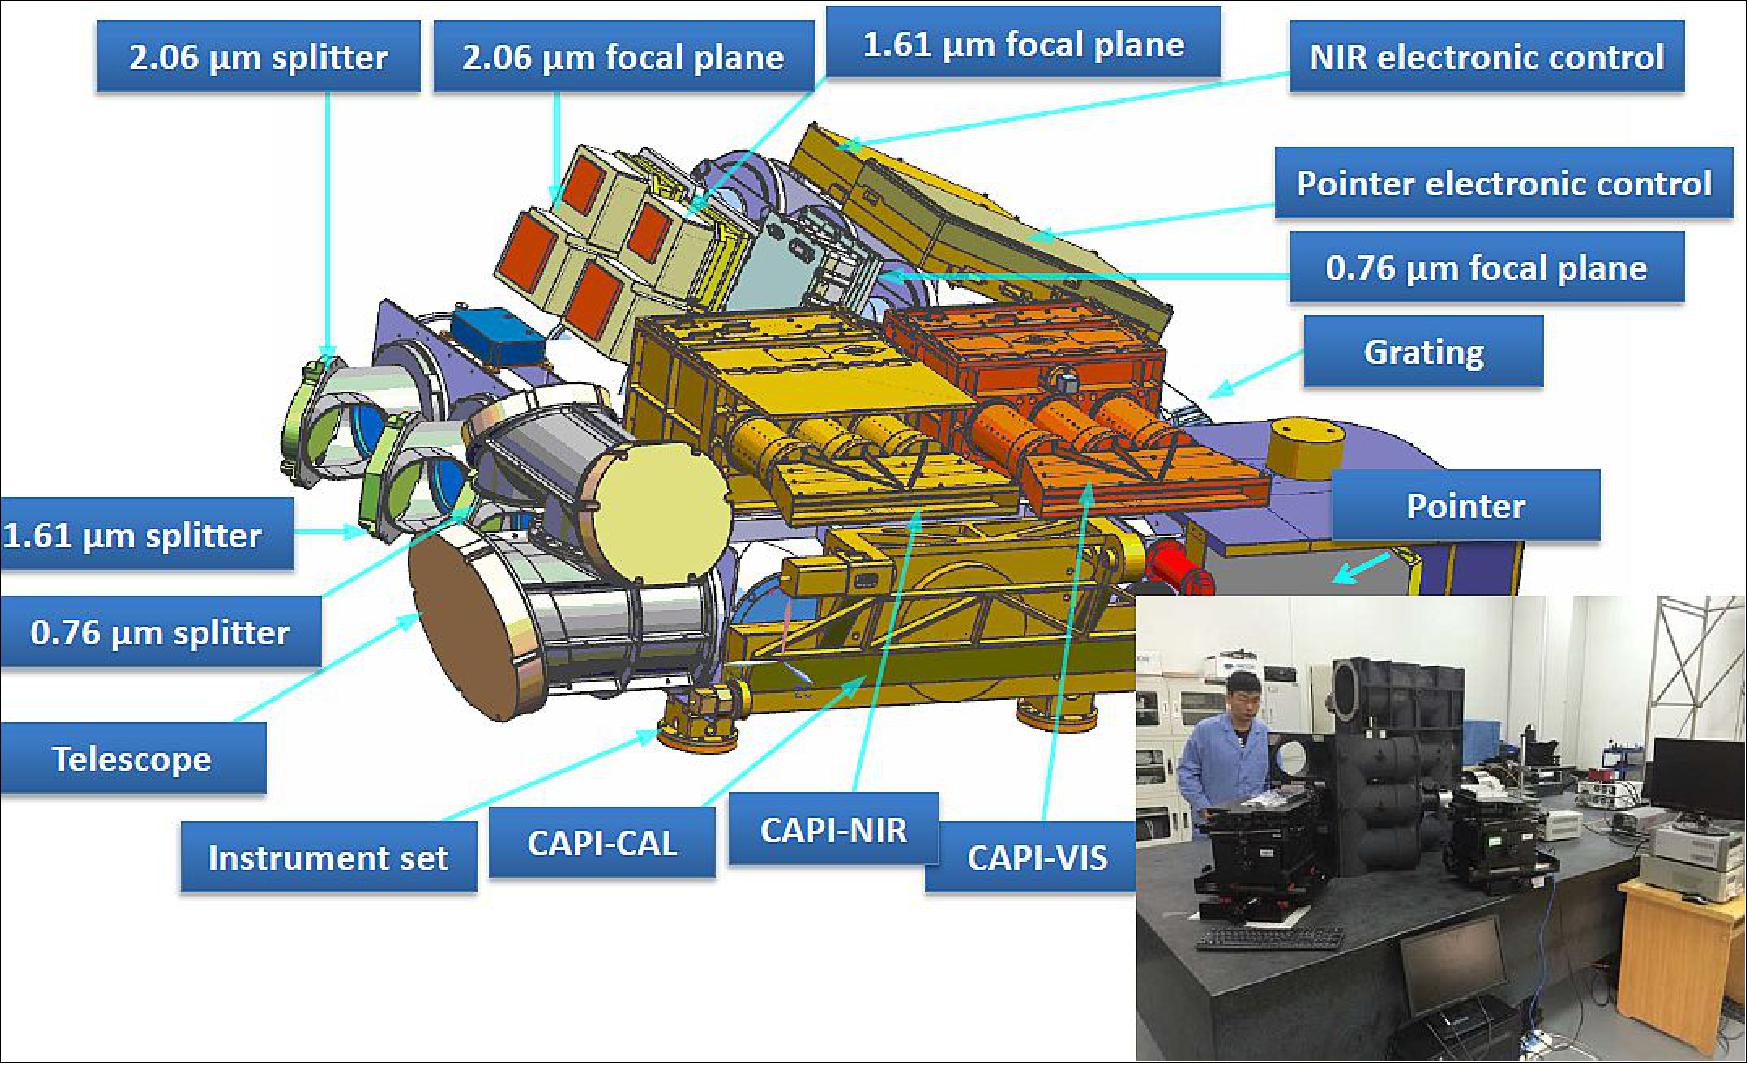 Figure 12: Schematic of the CDS (Carbon Dioxide Spectrometer) and CAPI assembly (image credit: TanSat collaboration, Ref. 9)